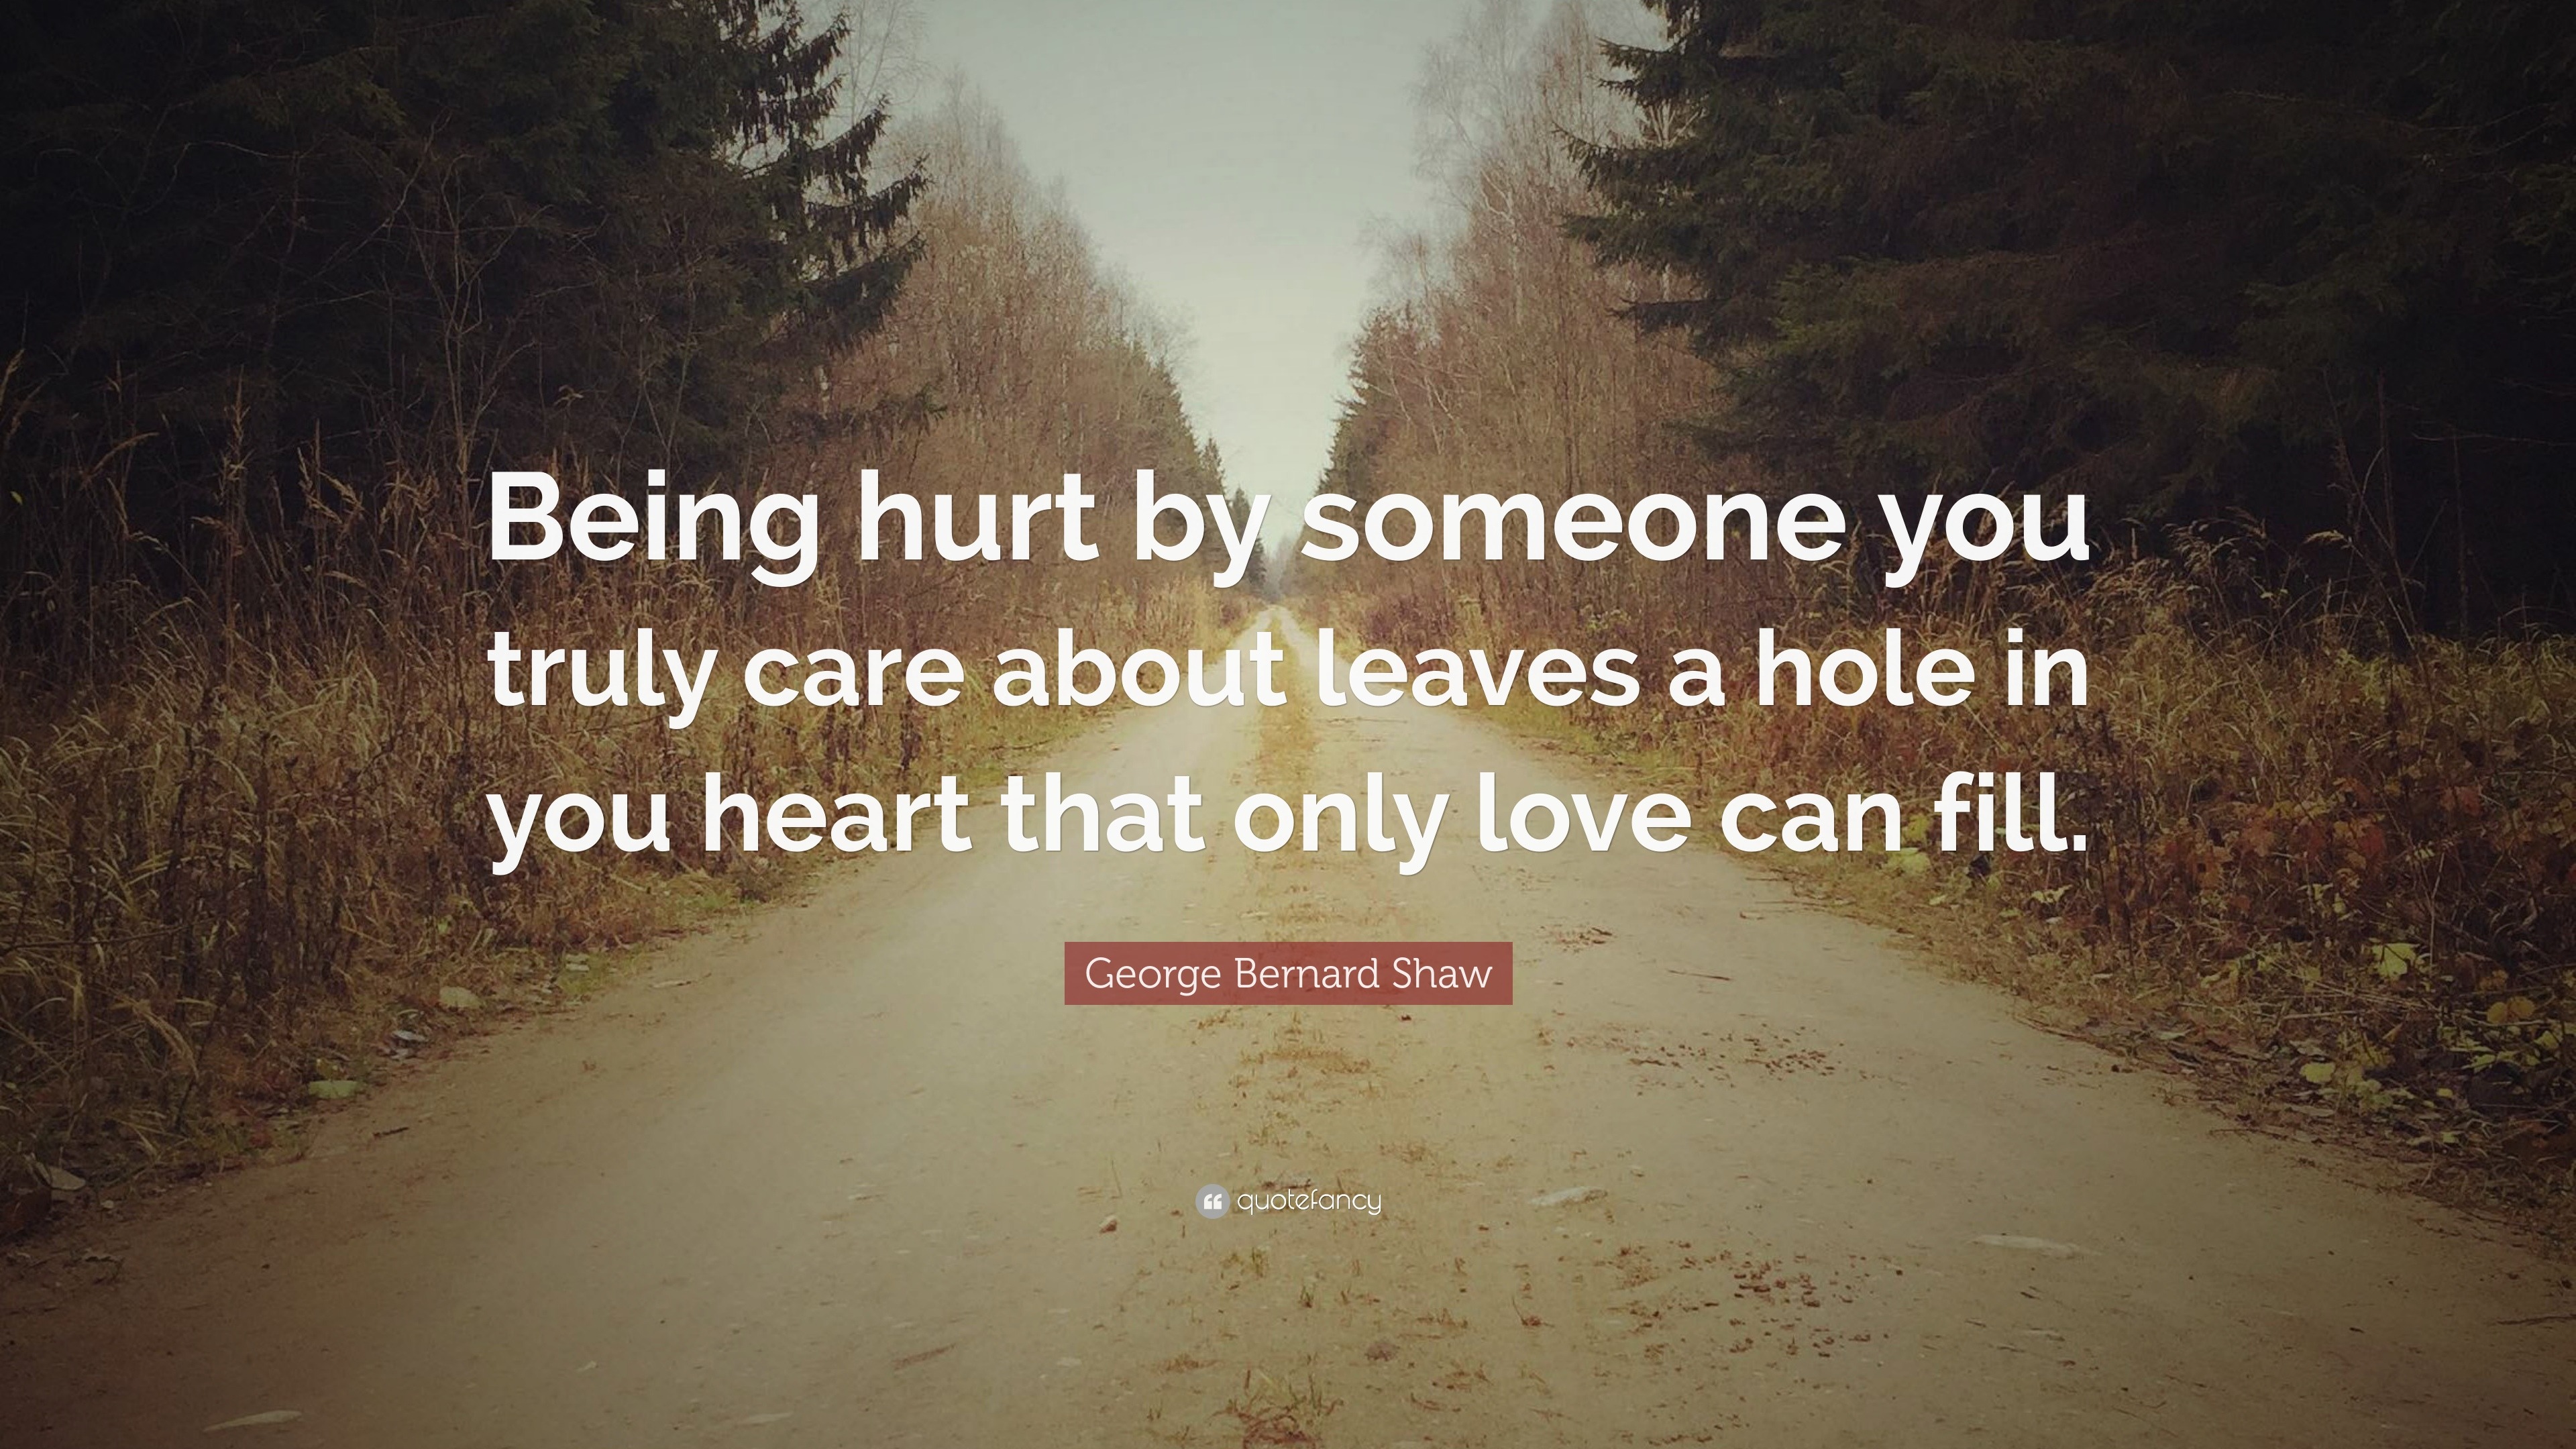 When You Hurt someone You Love Quotes | Thousands of Inspiration Quotes